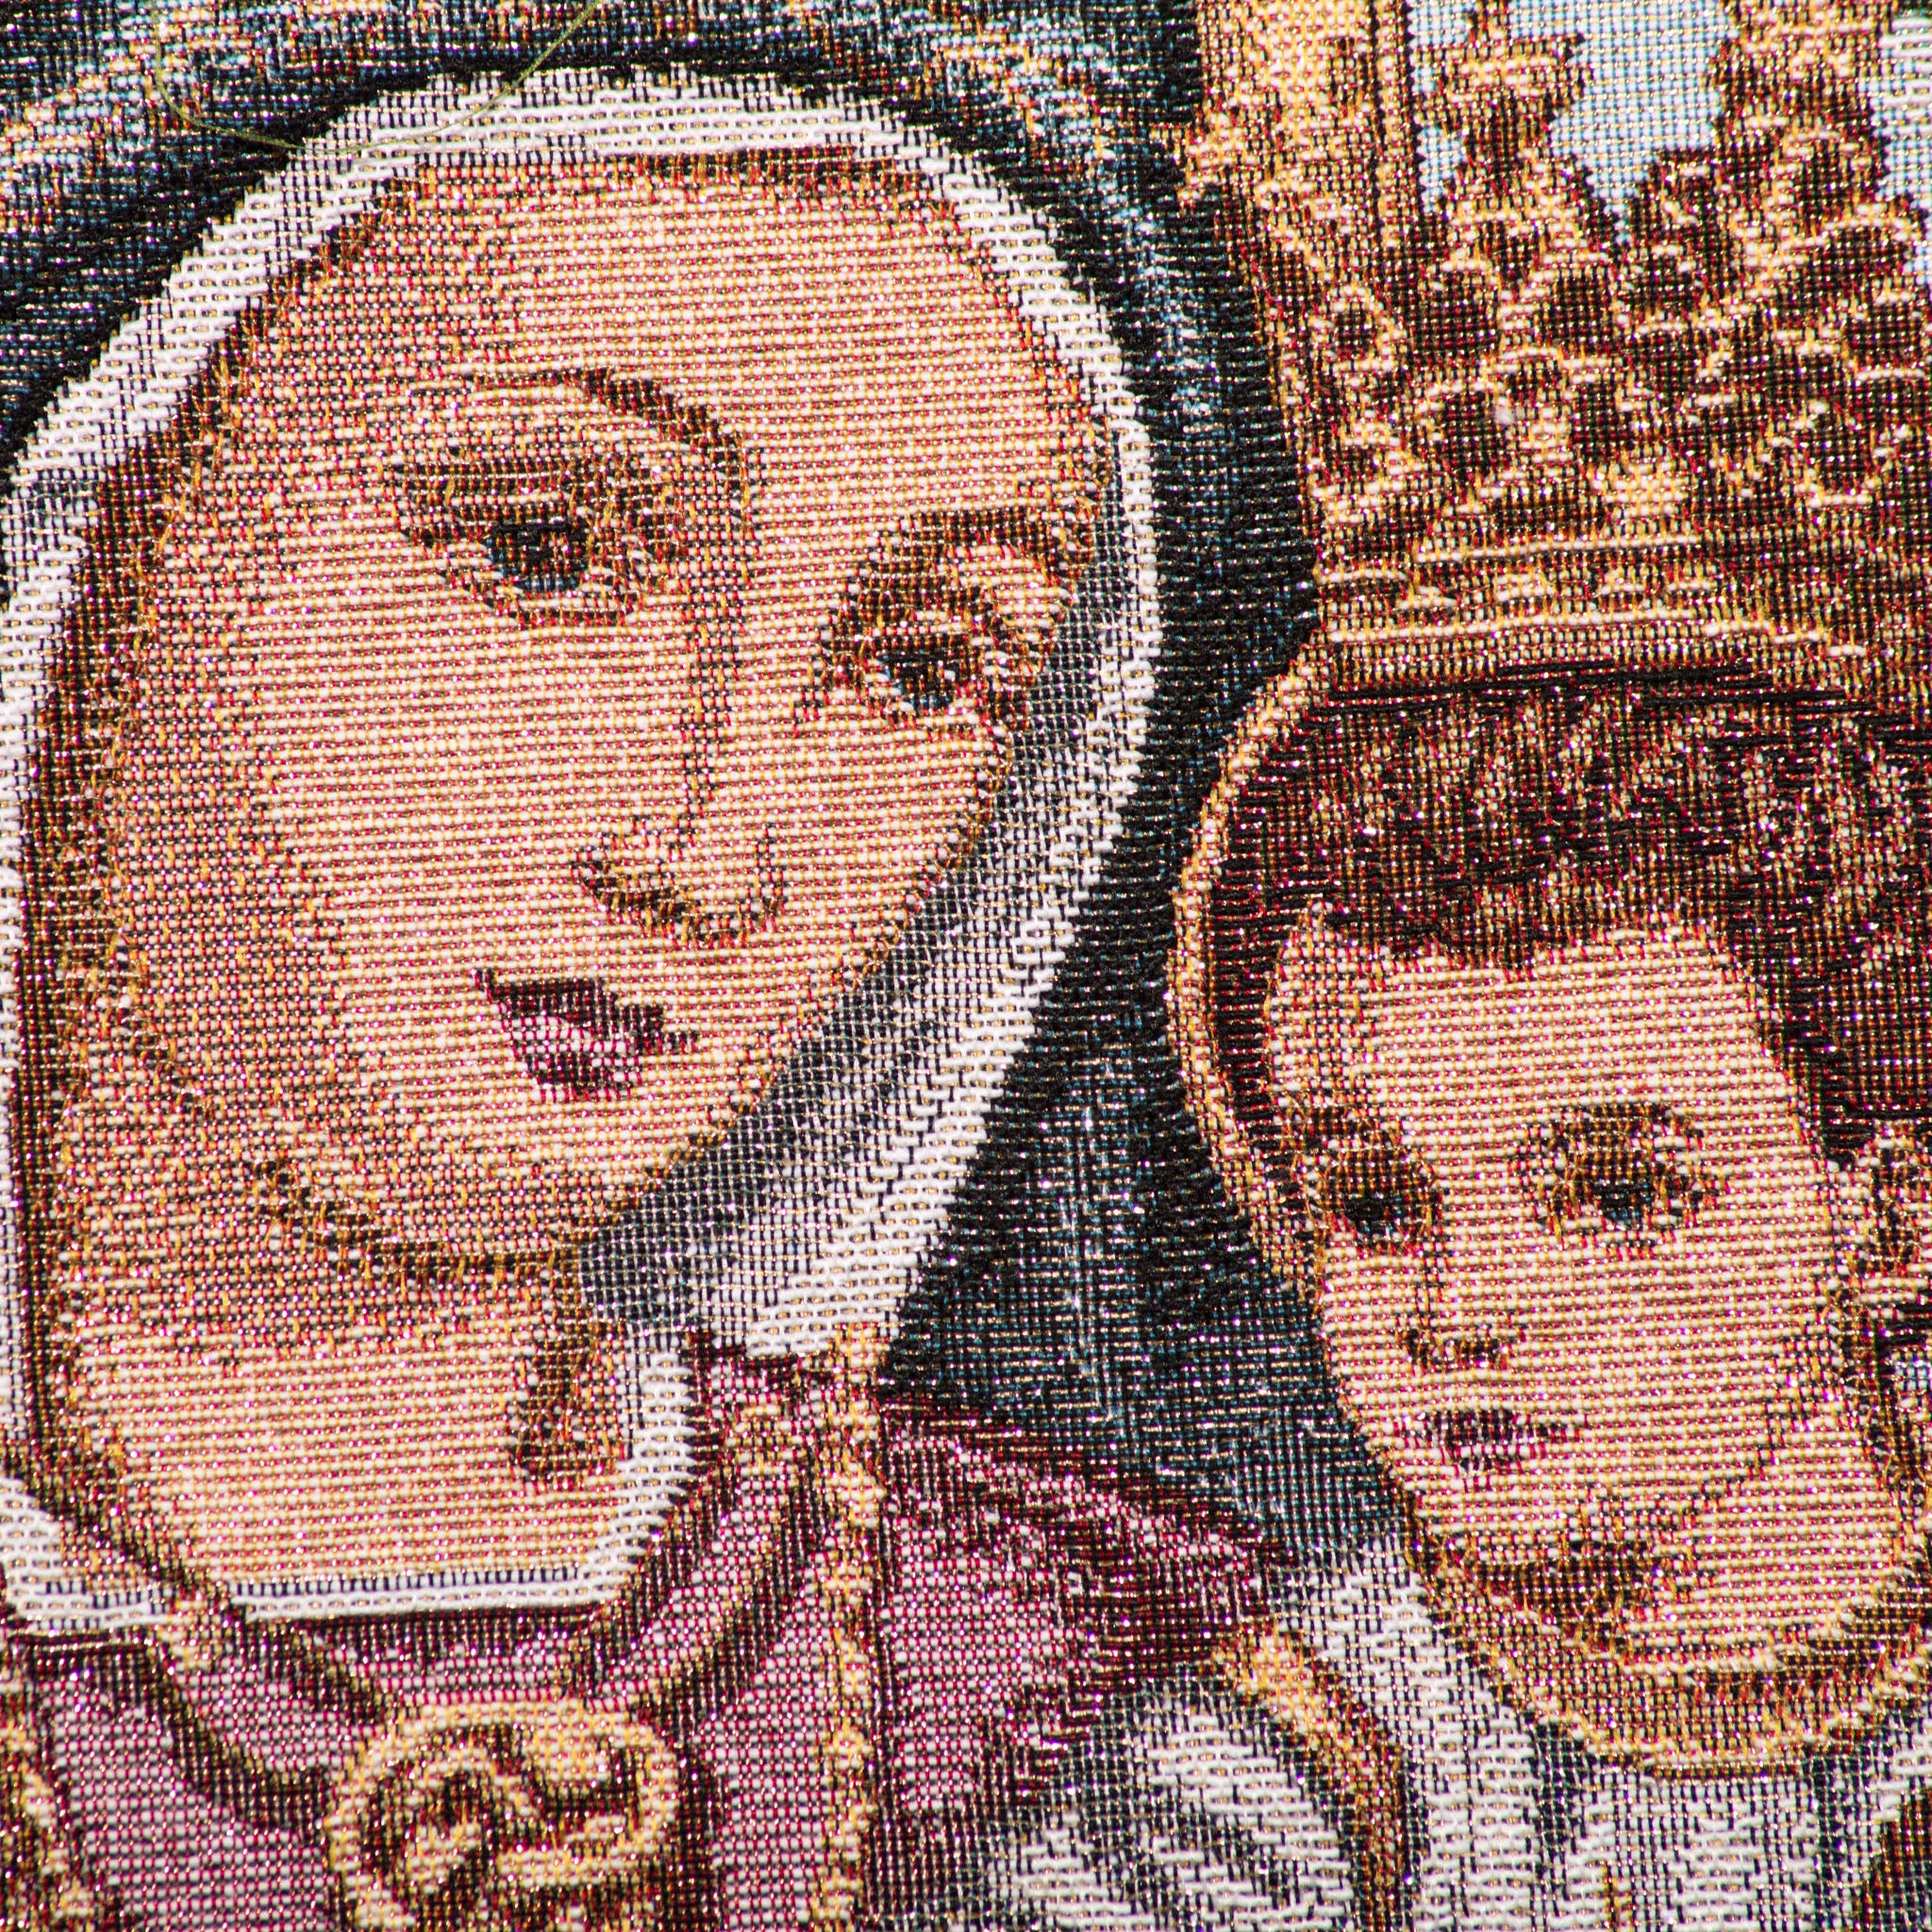 Tapestry of Our Lady of Grace